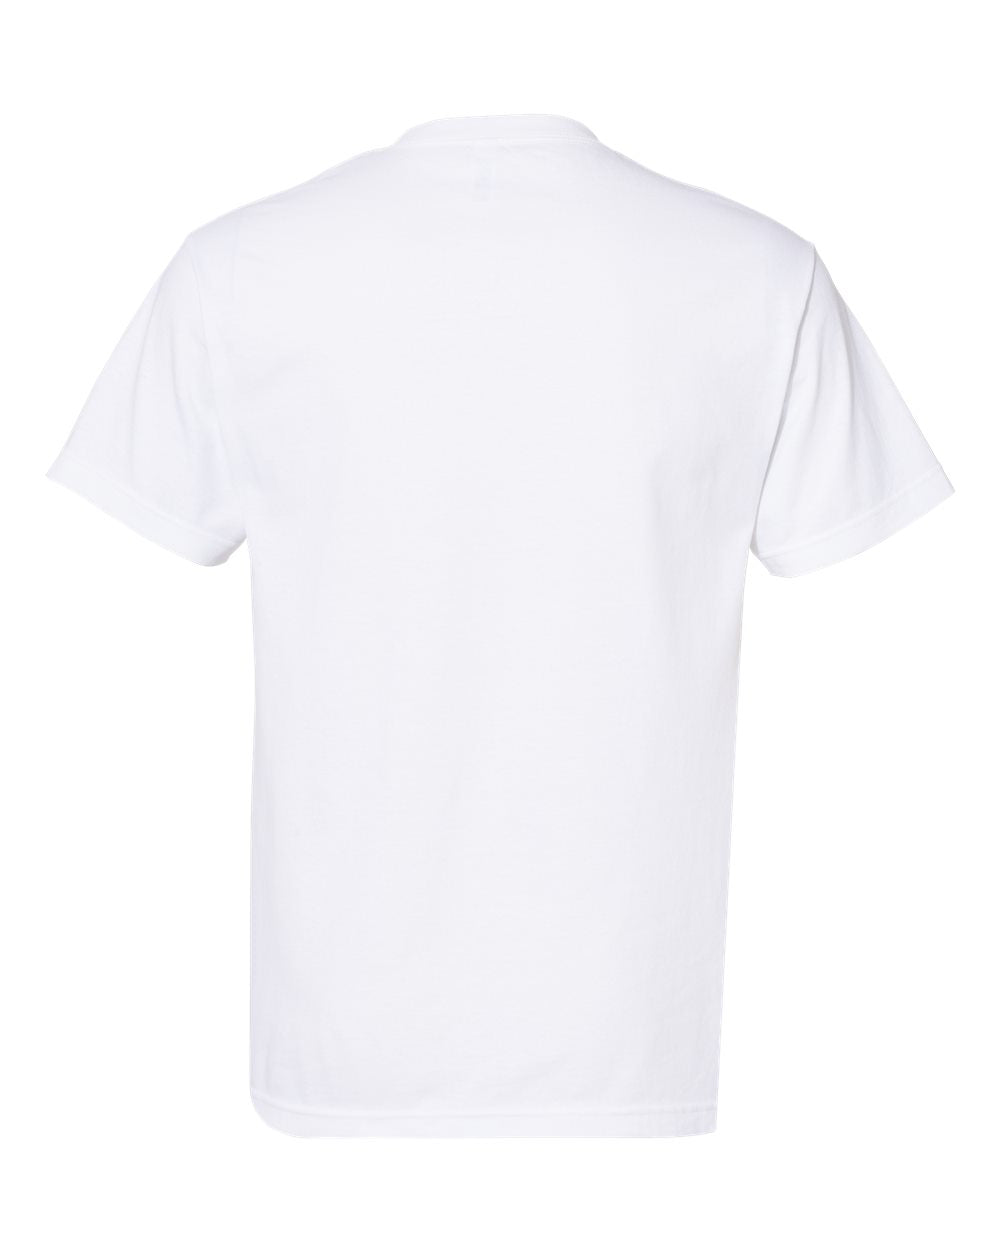 American Apparel Unisex Heavyweight Cotton Tee 1301 #color_White